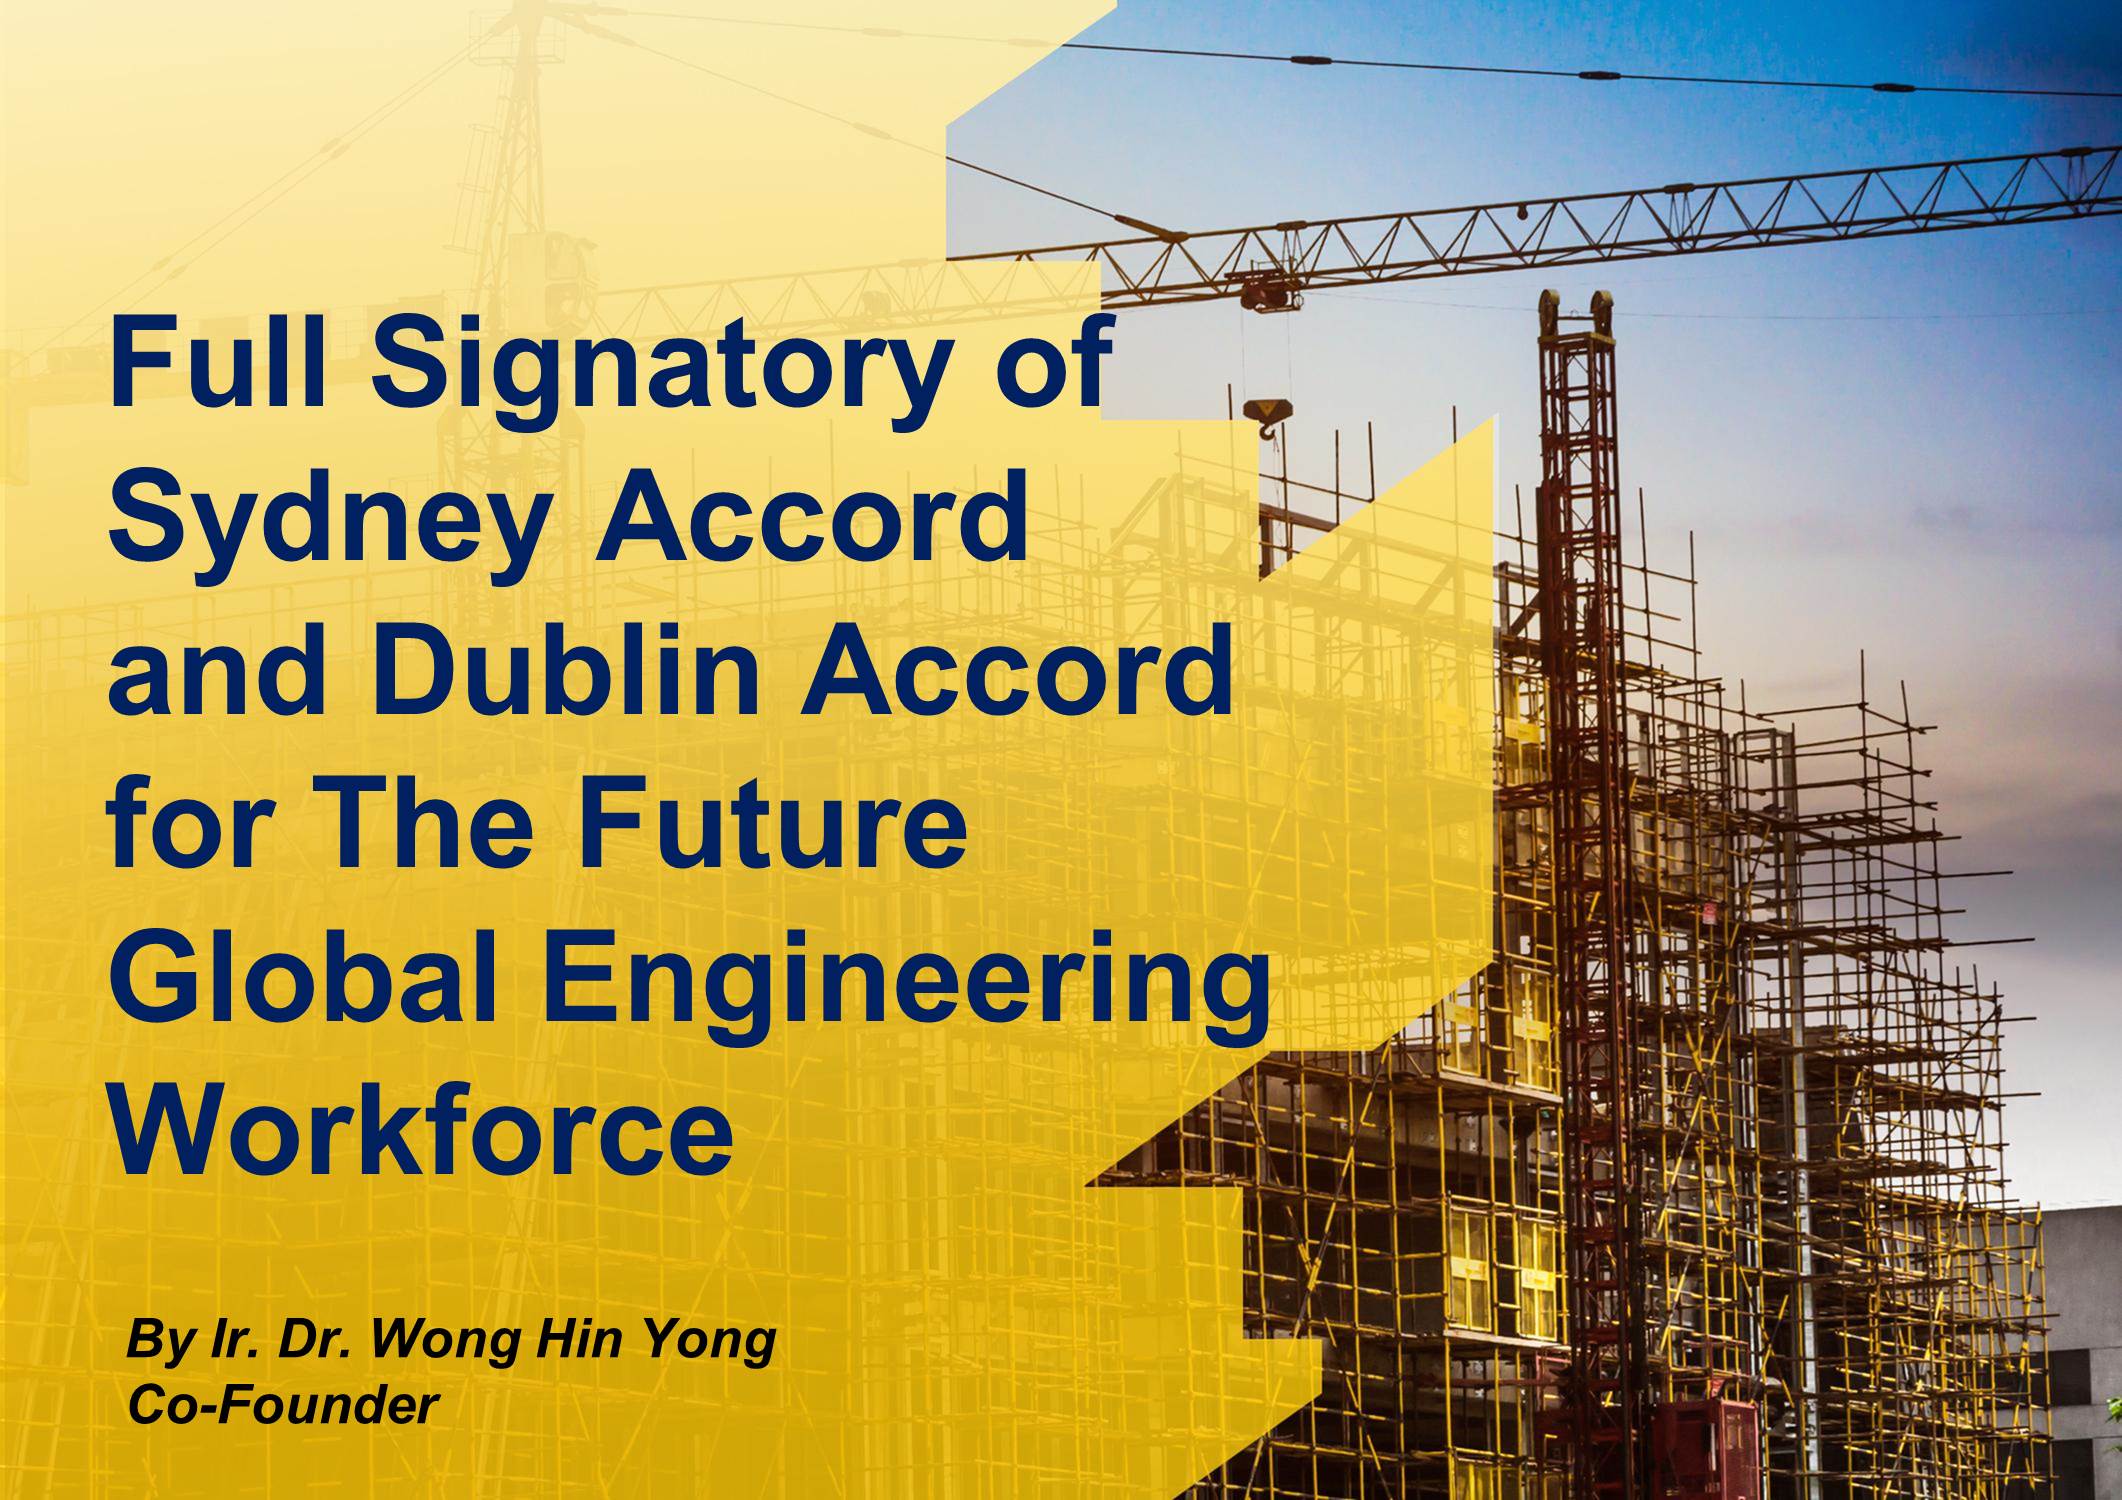 Full Signatory of Sydney Accord and Dublin Accord for The Future Global Engineering Workforce